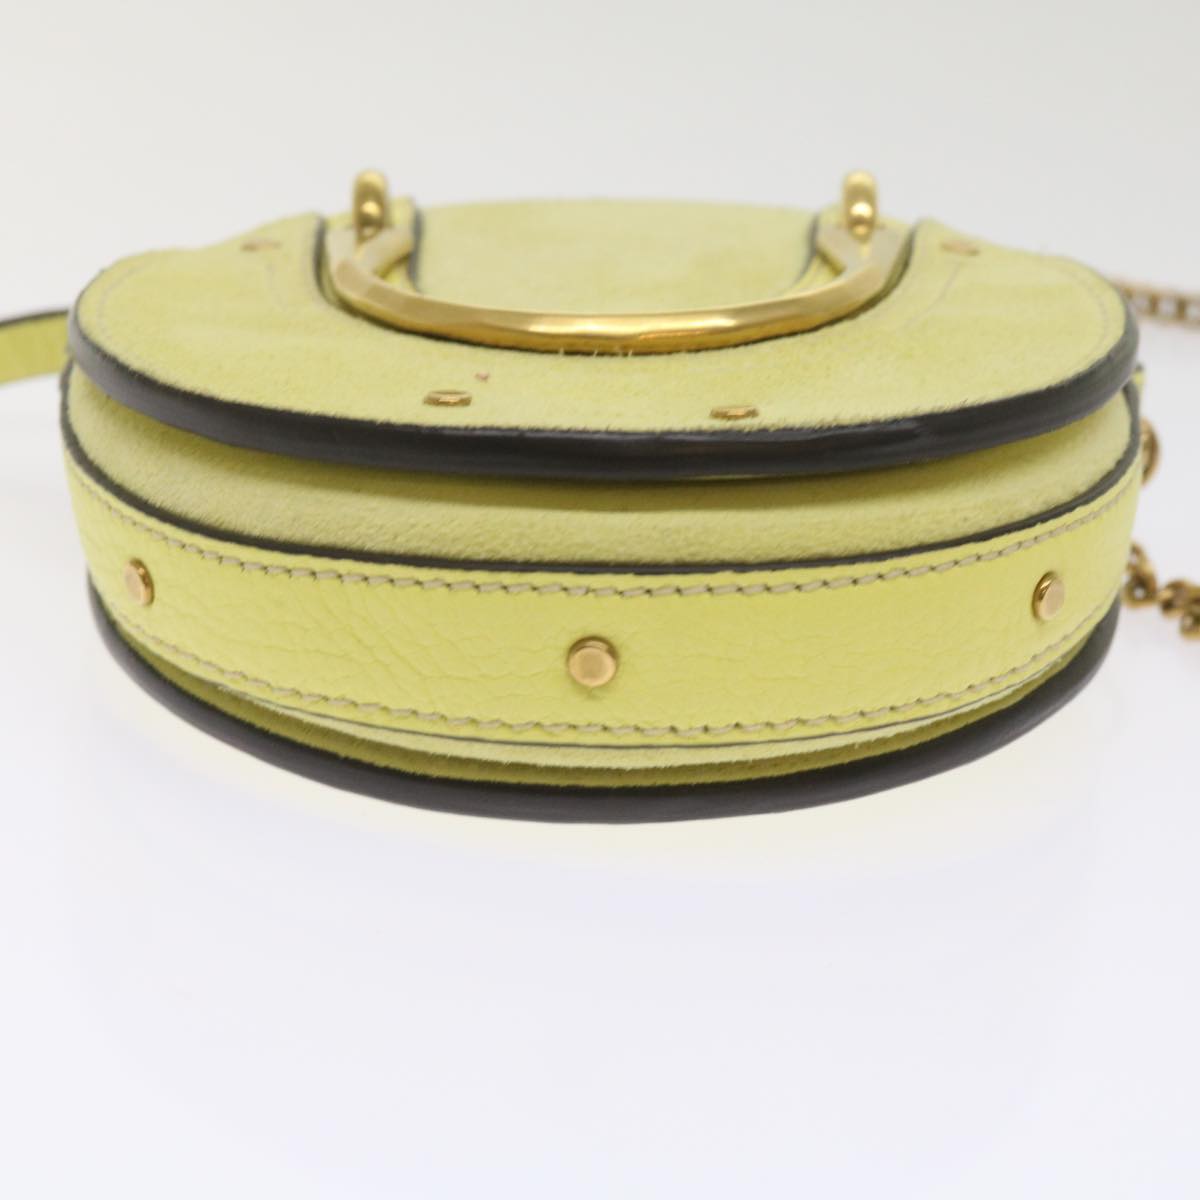 Chloe Pixy Hand Bag Suede Leather 2way Yellow Auth 65664